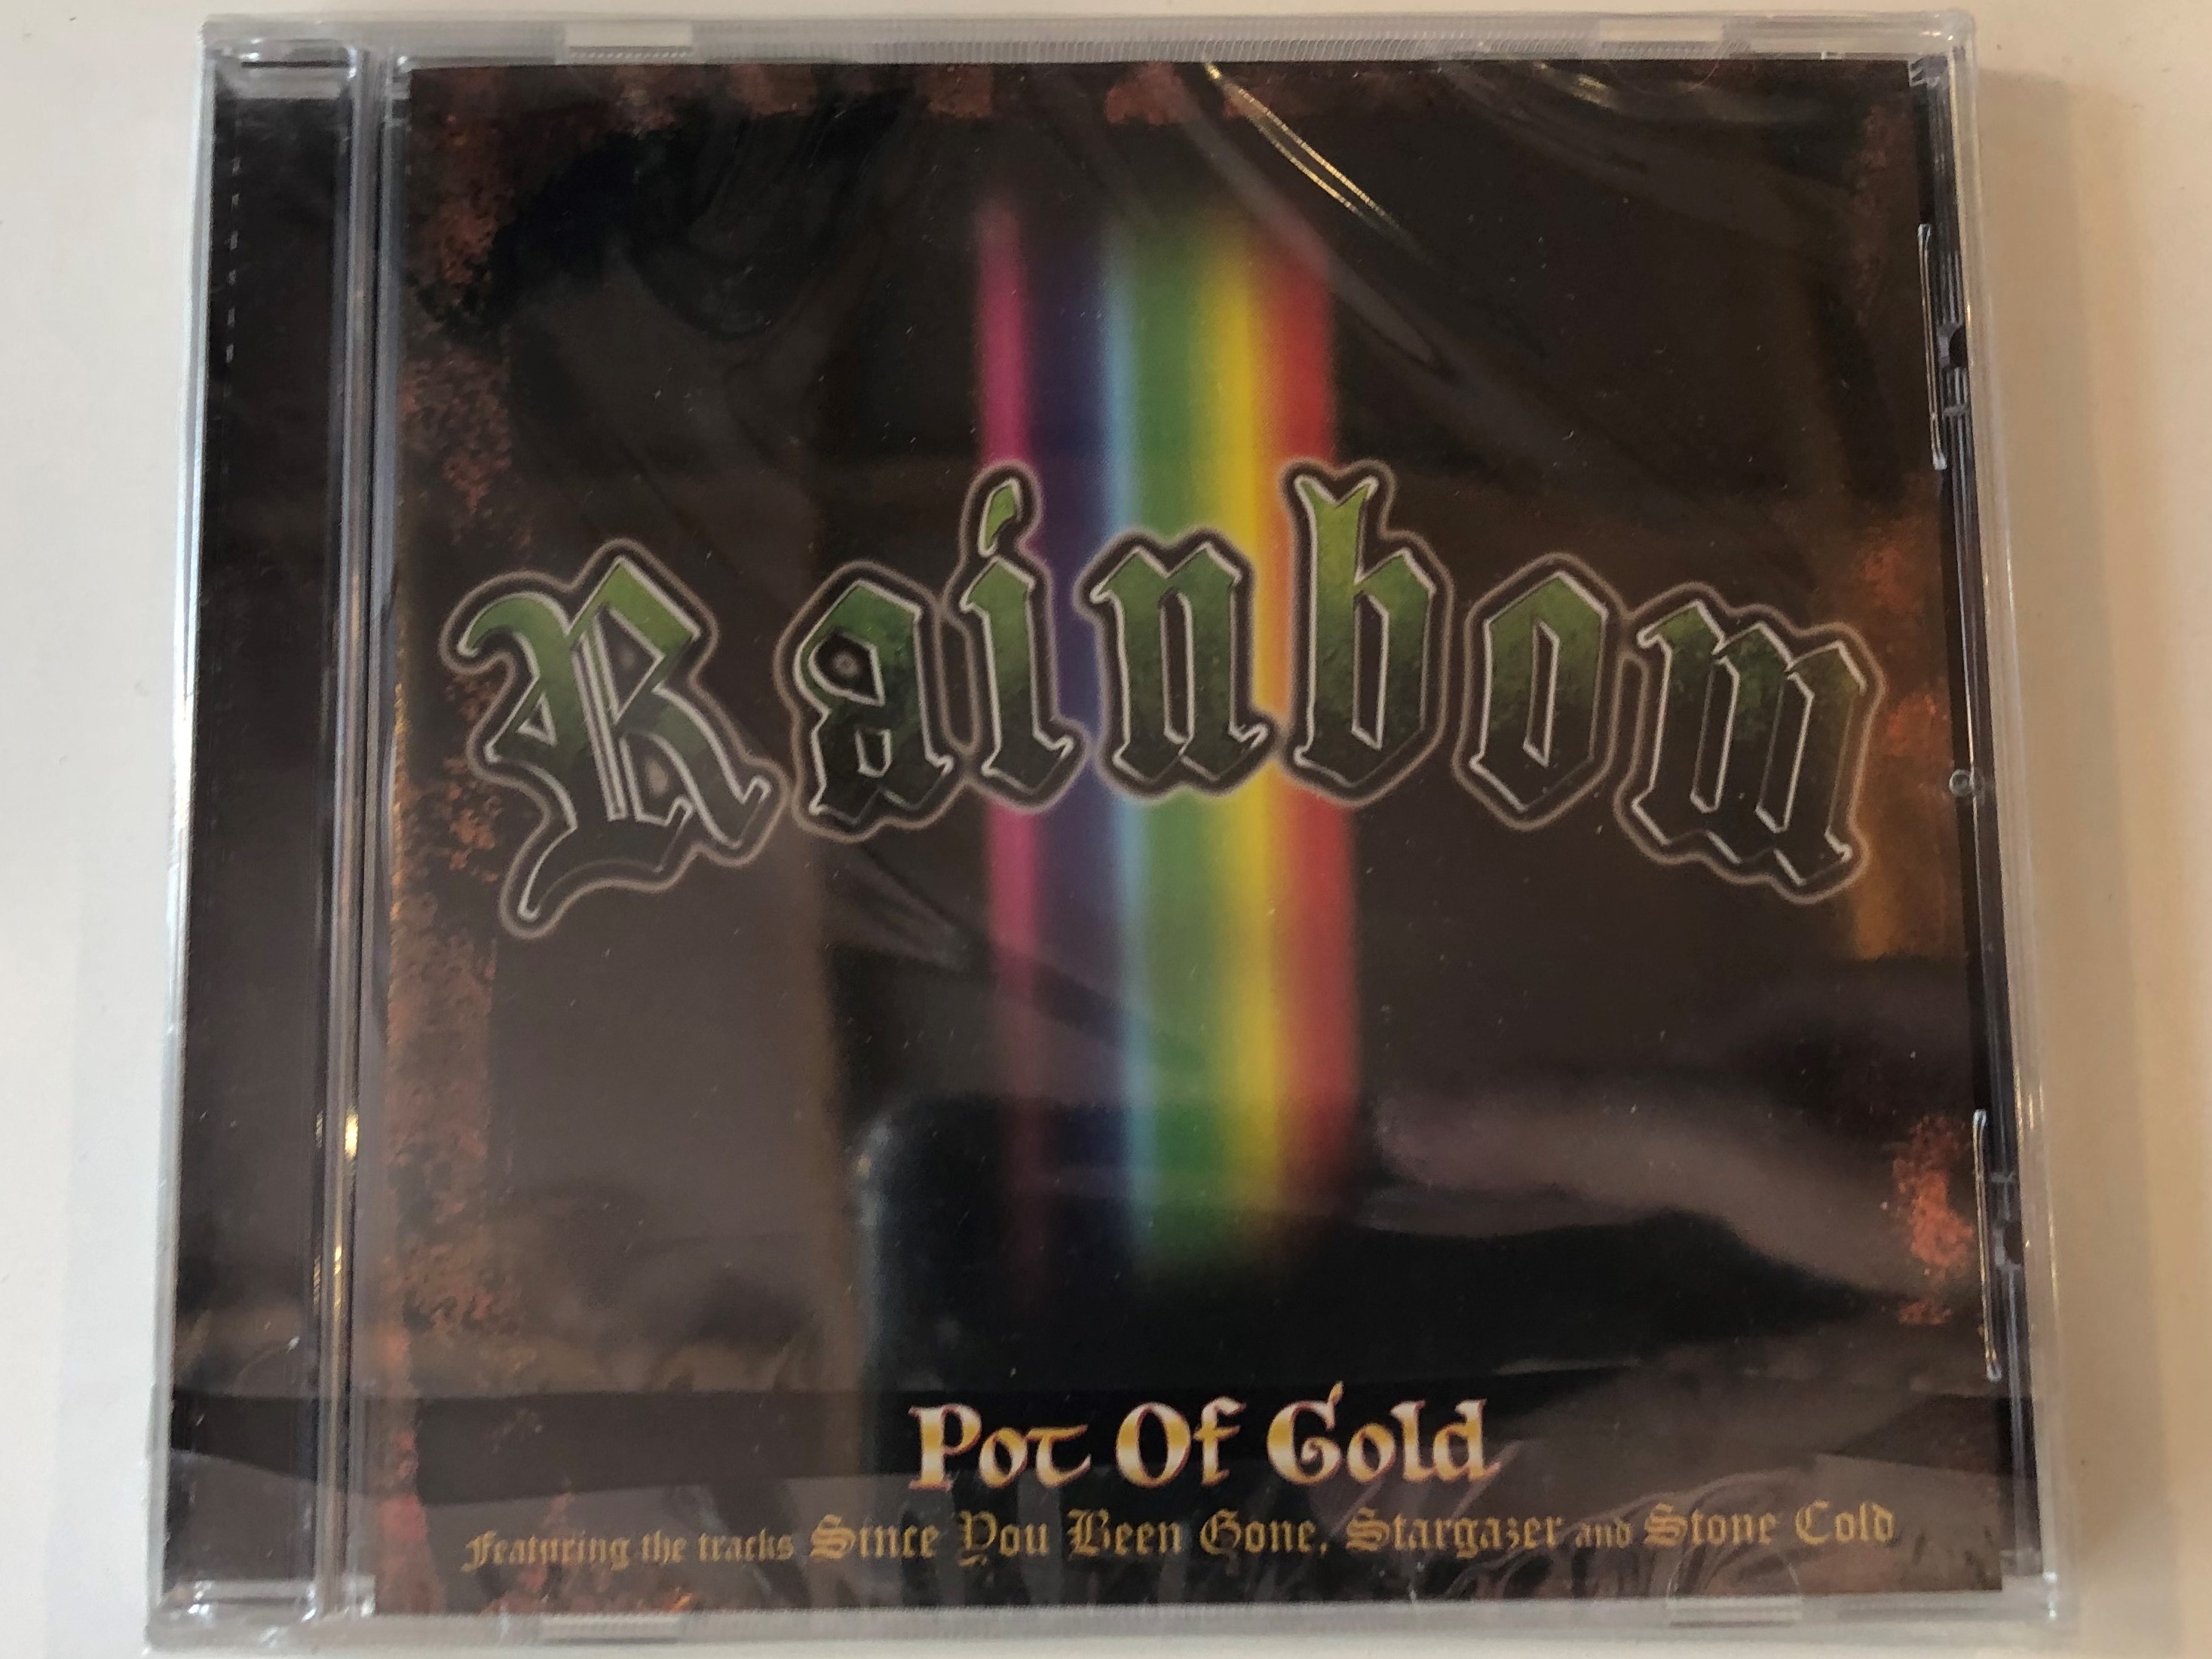 rainbow-pot-of-gold-featuring-the-tracks-since-you-been-gone-stargazer-and-stone-cold-spectrum-music-audio-cd-2002-544-651-2-1-.jpg